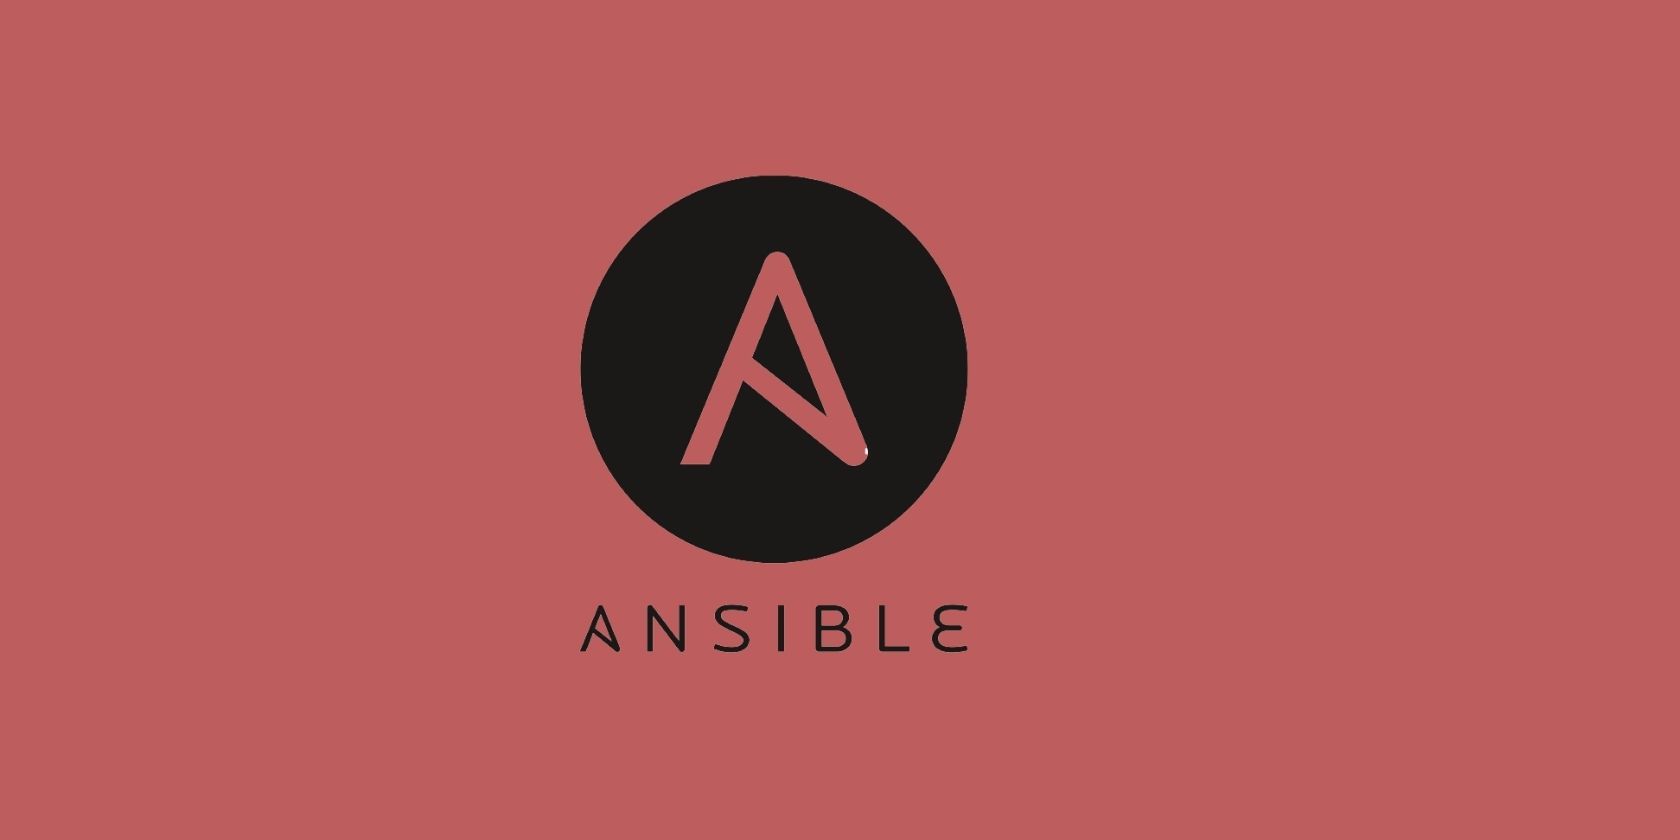 Configuring Ansible For AWS Management